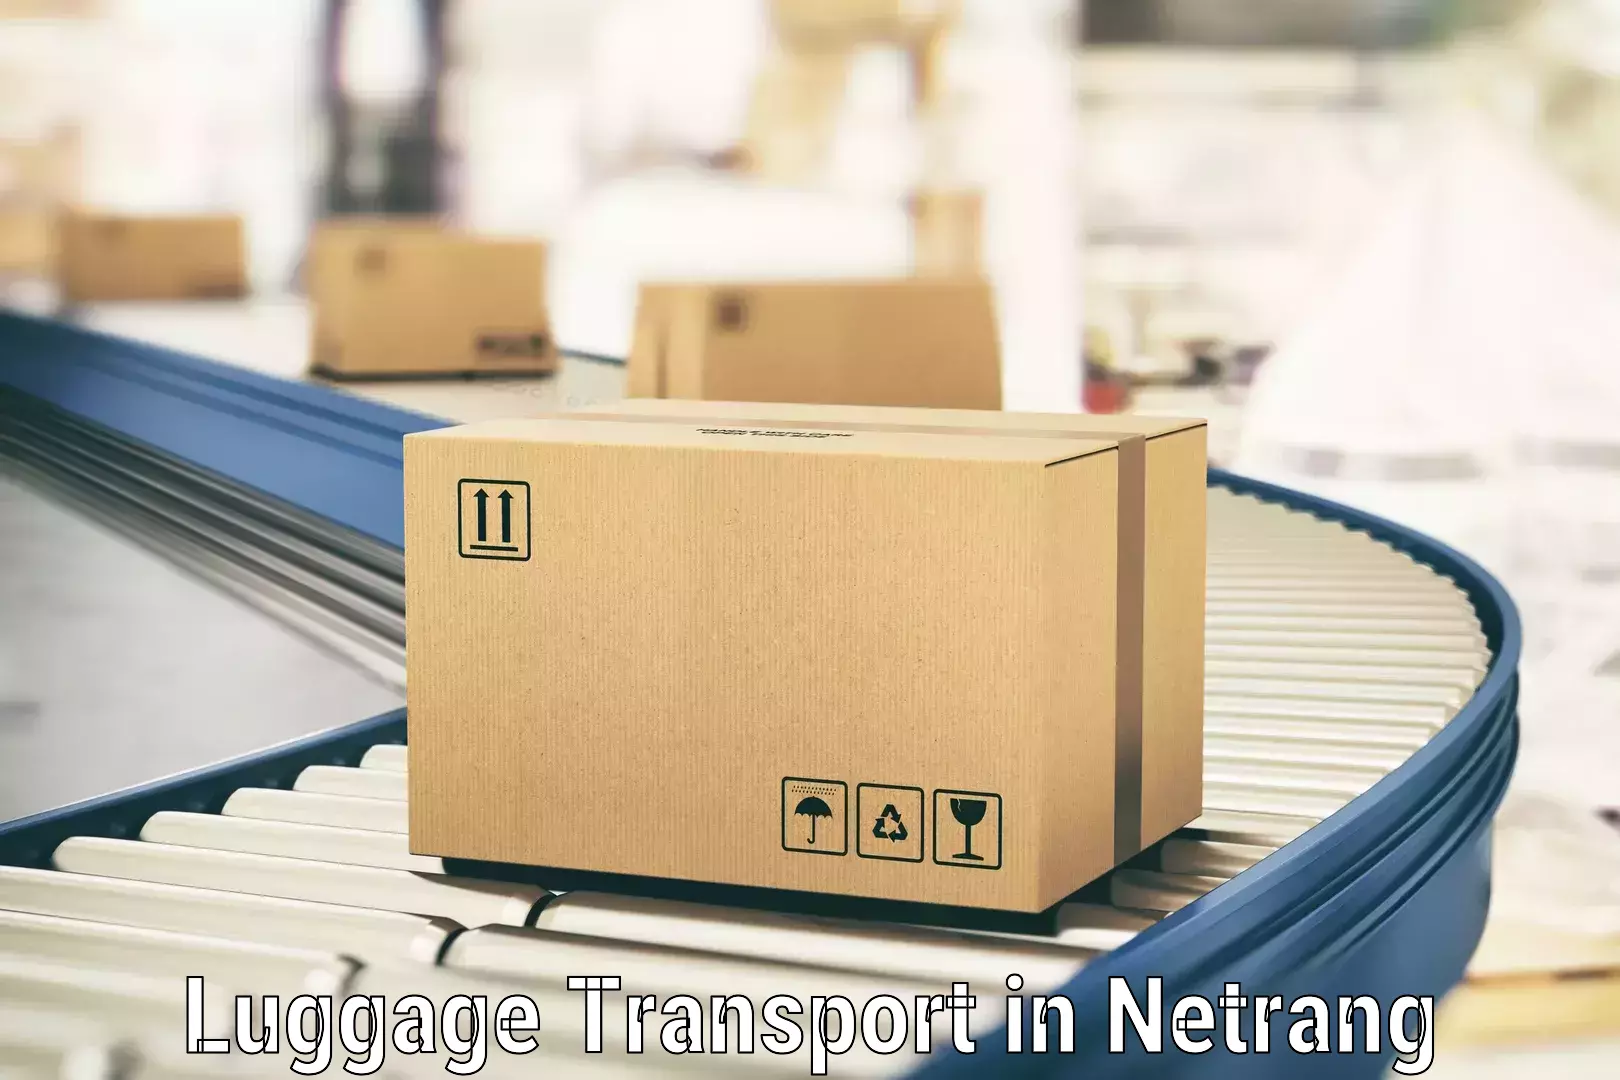 Luggage transport pricing in Netrang